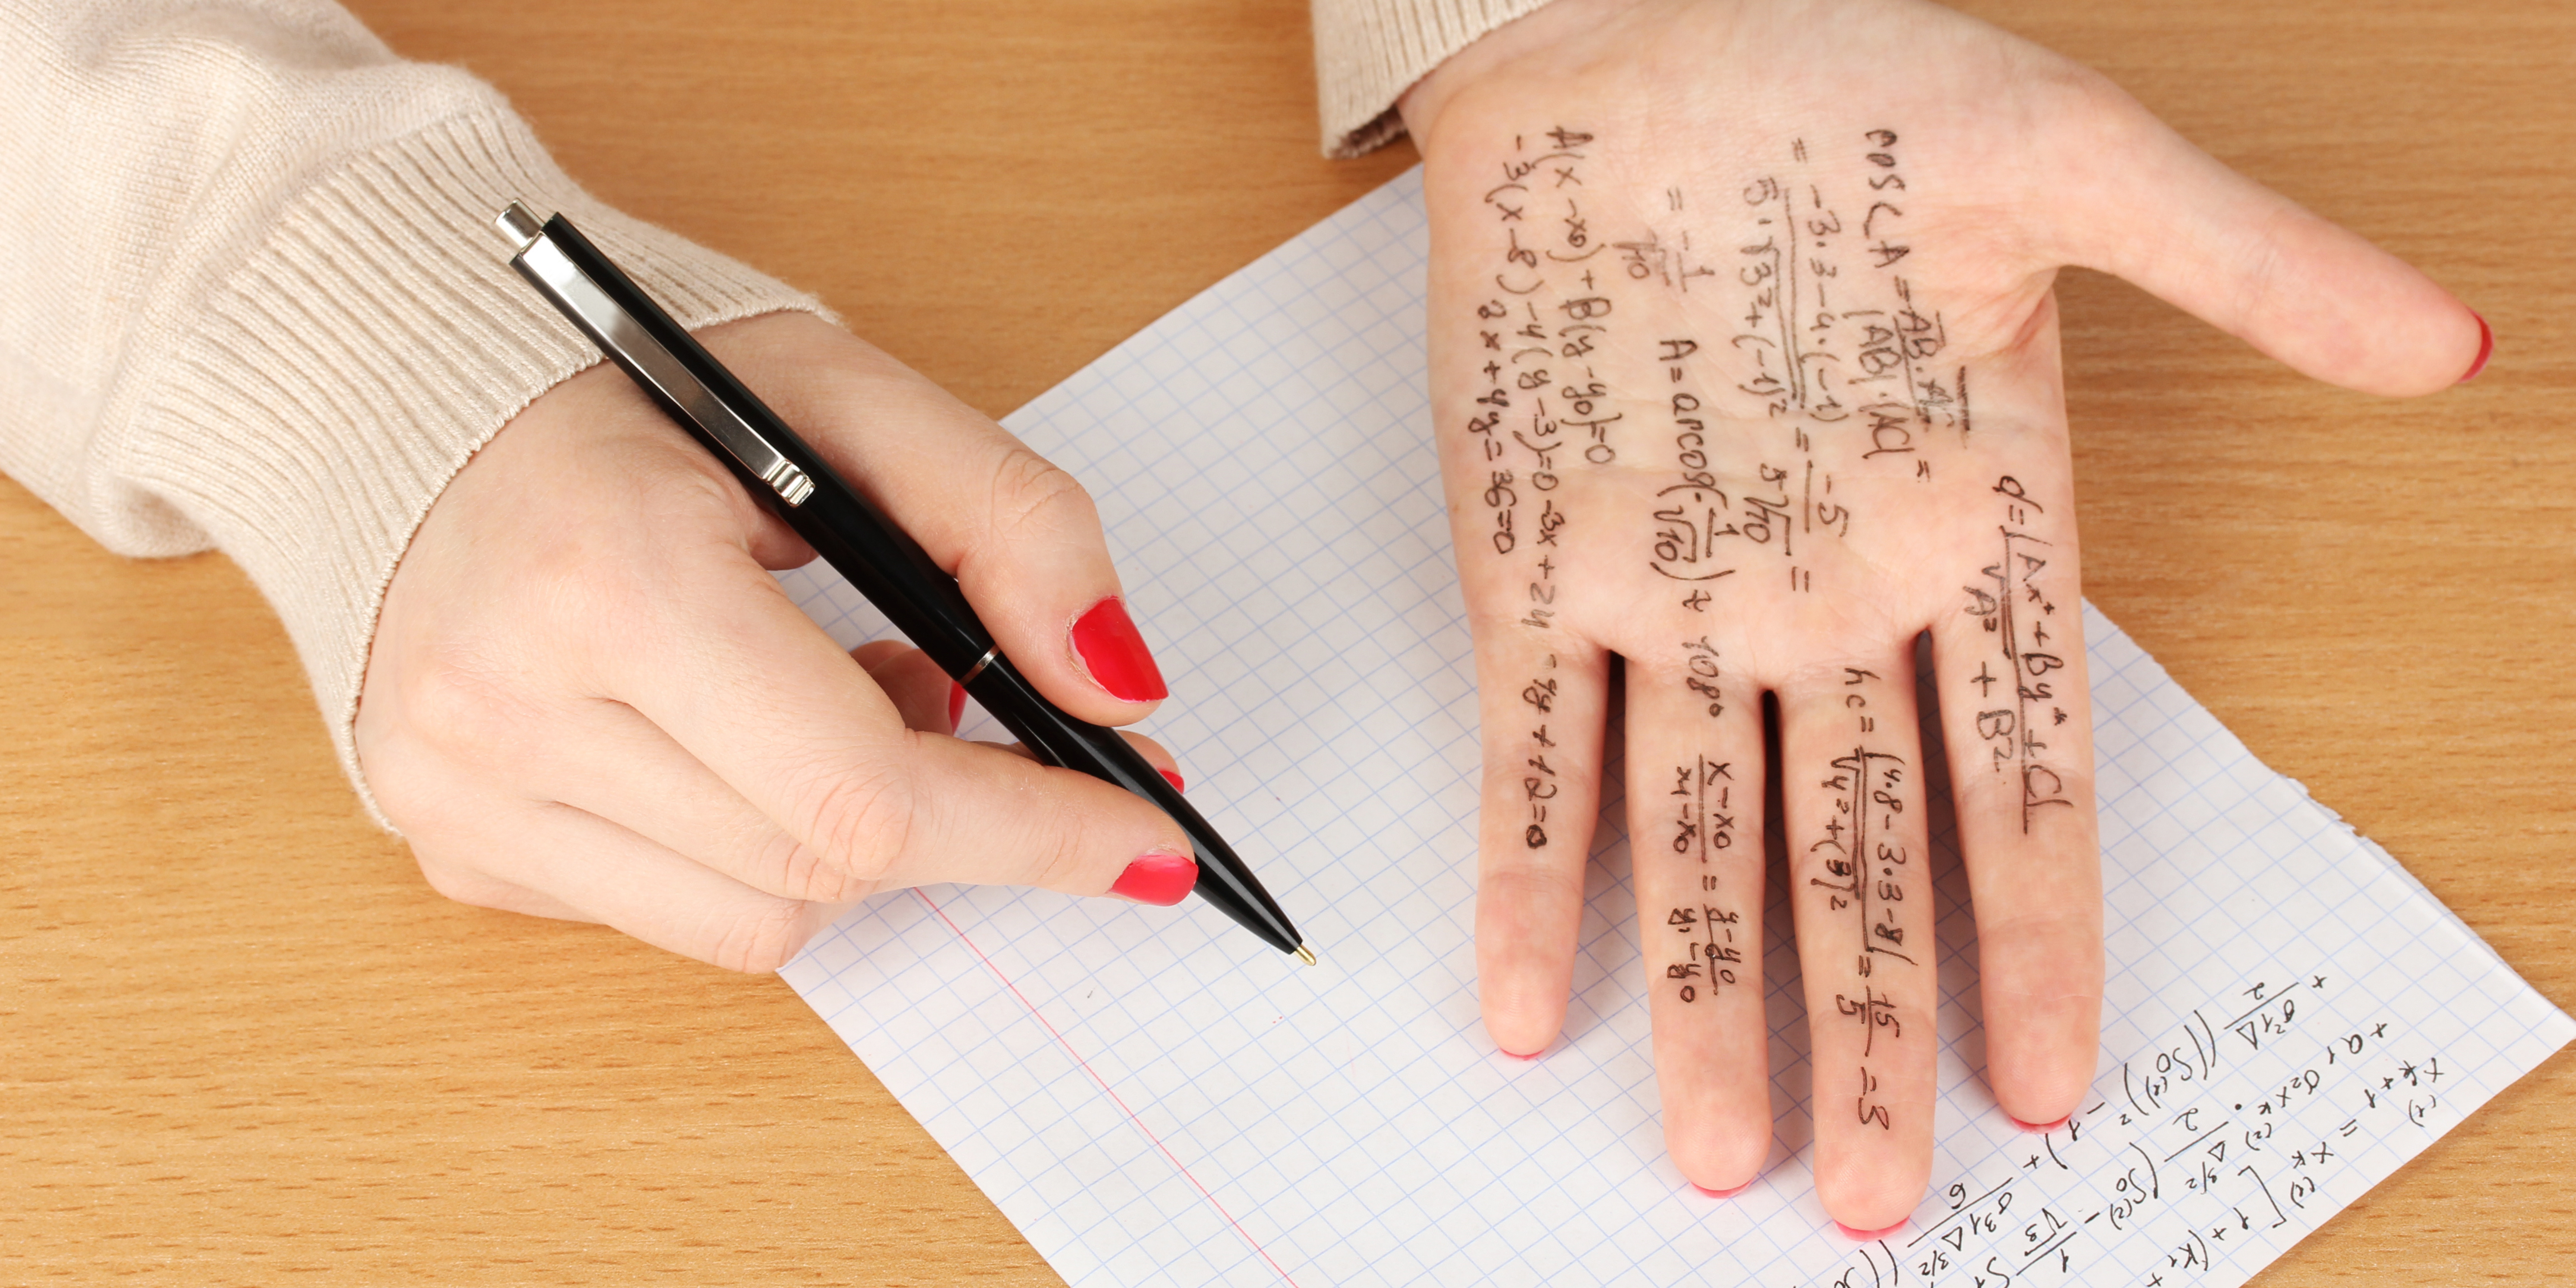 Hand with pen and hand with math formulas.